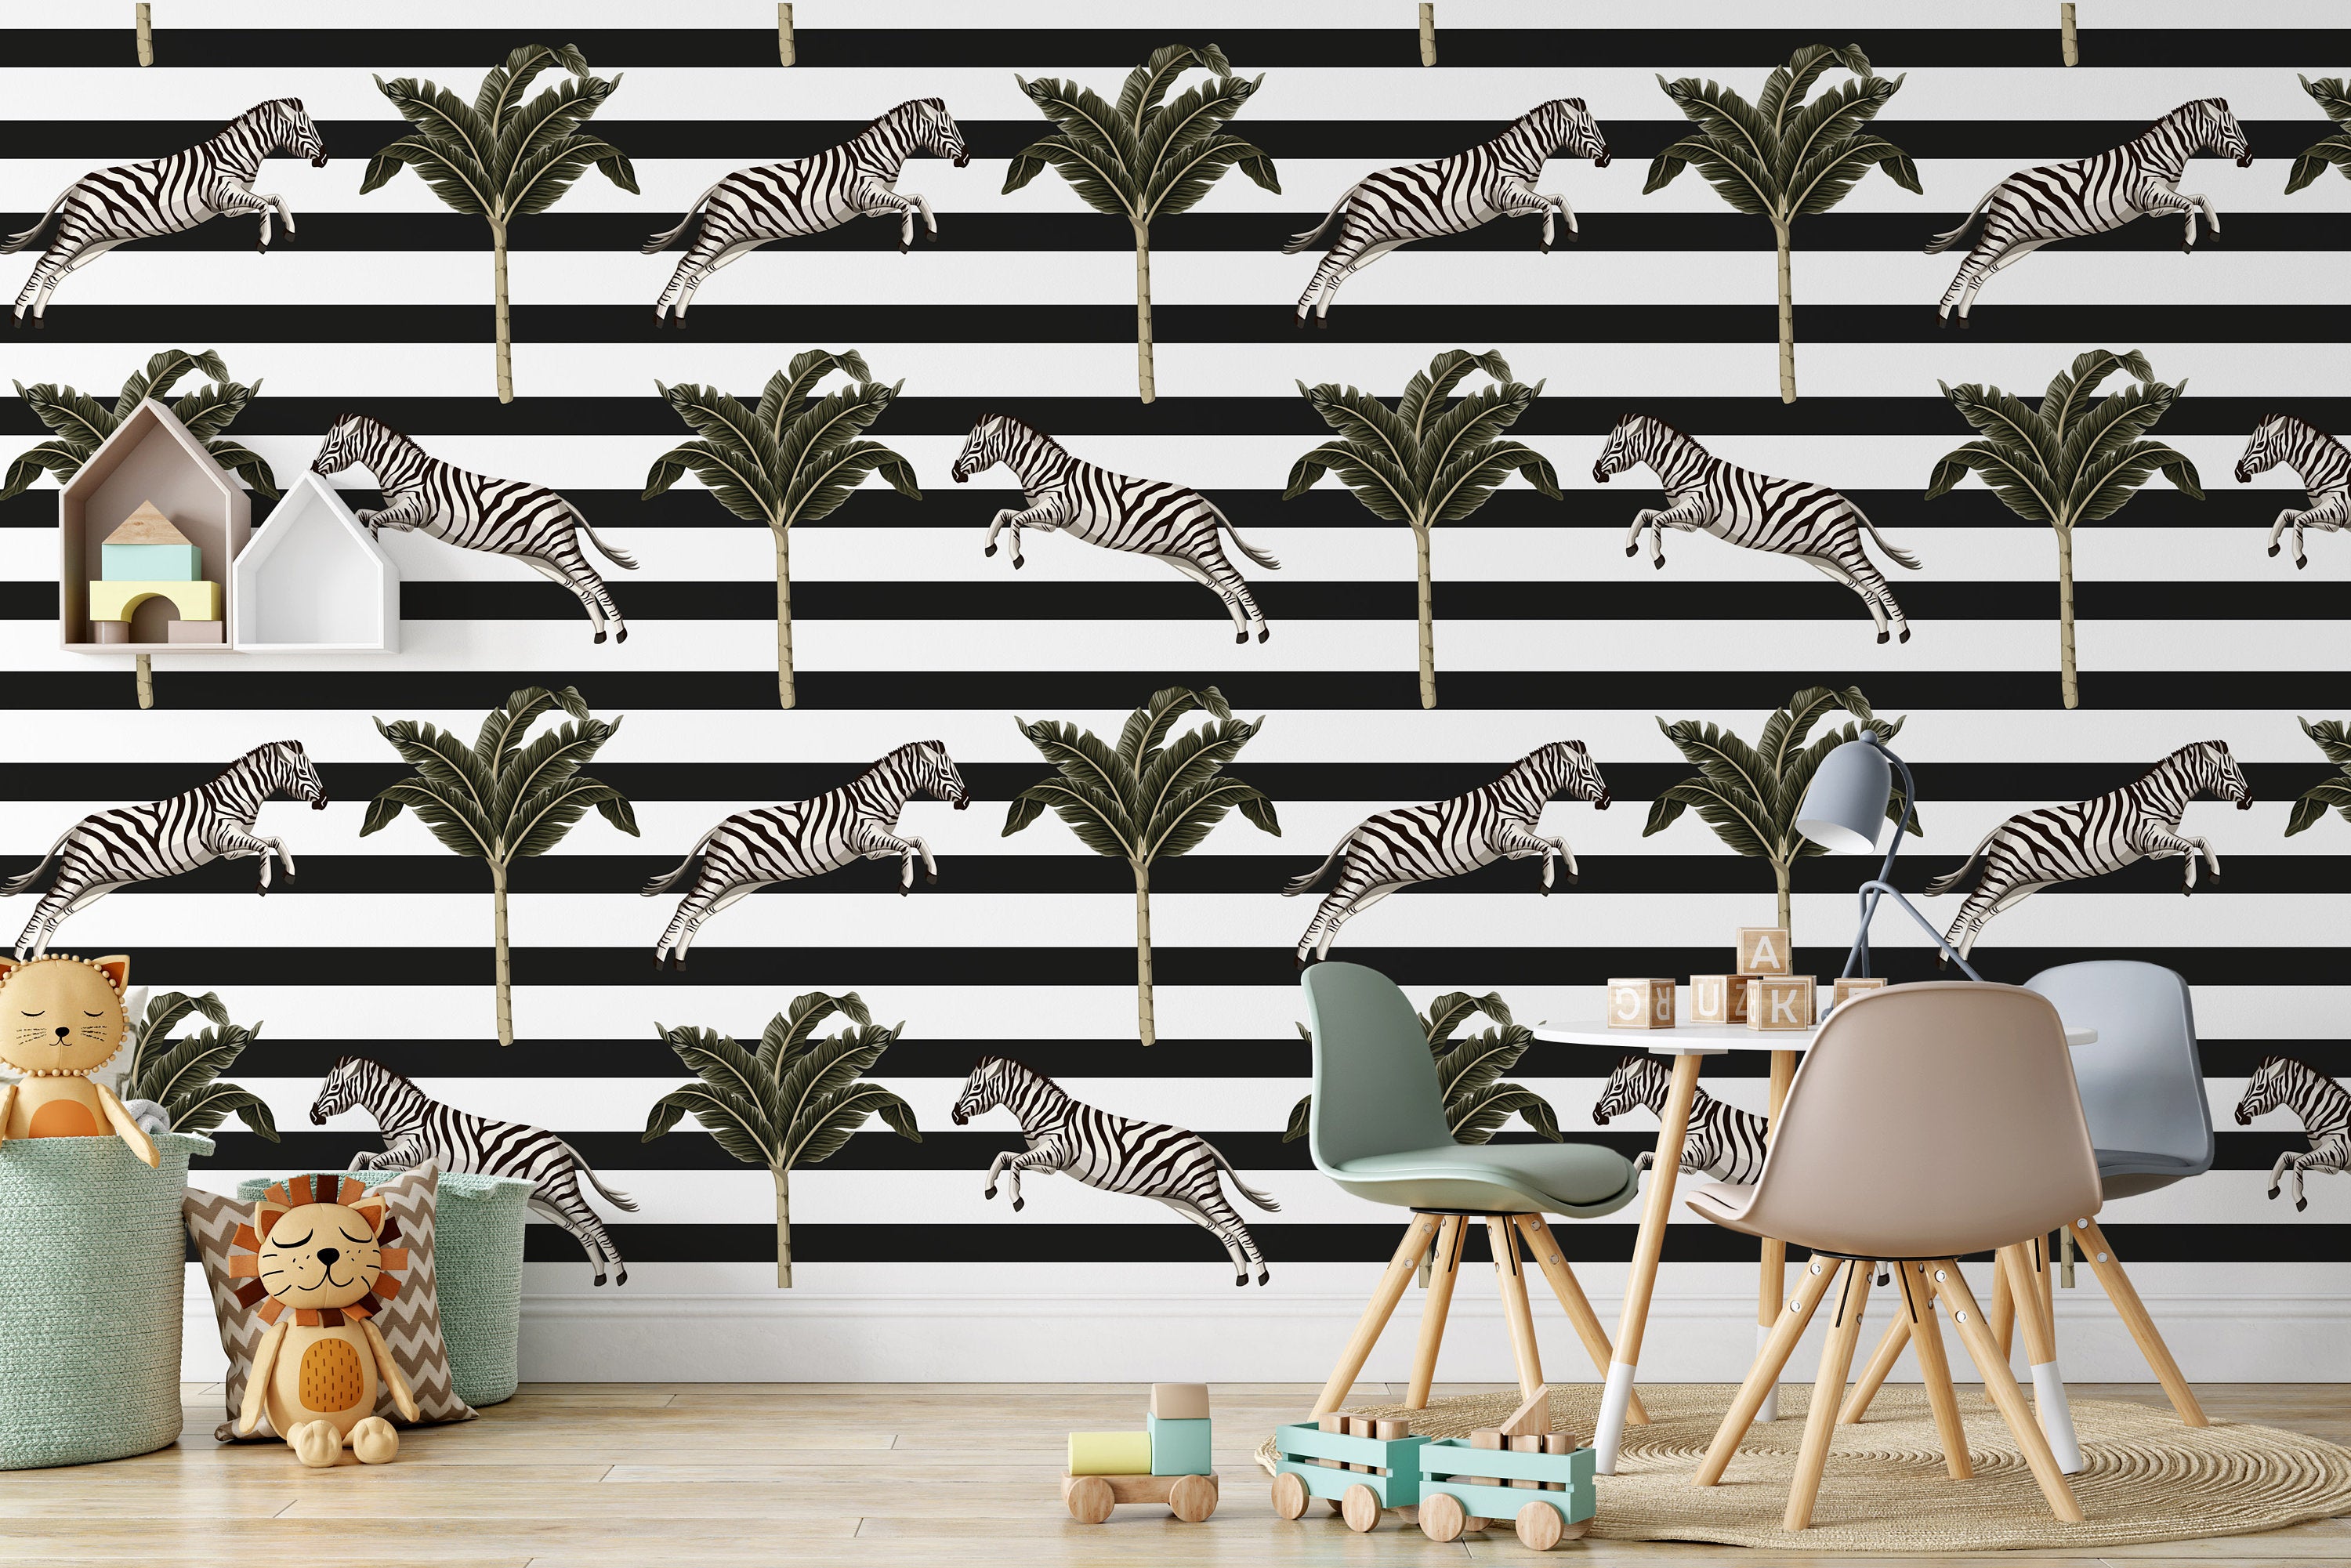 Tropical Banana Tree Zebra Running Wildlife Animal Floral Wallpaper Self Adhesive Peel and Stick Wall Sticker Wall Decoration Removable